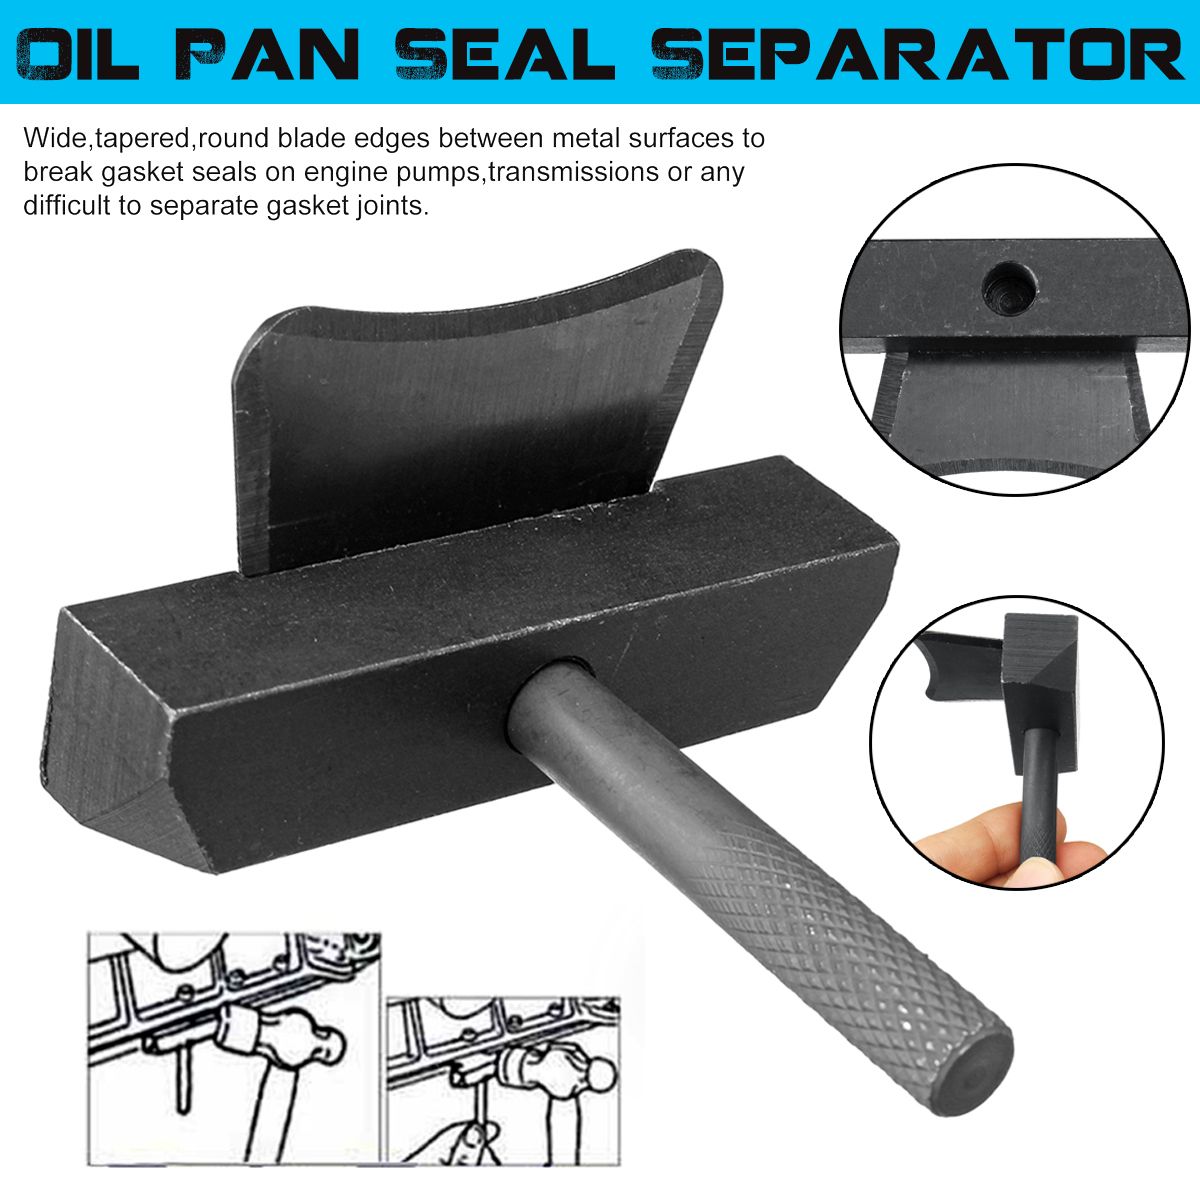 2-in-1-Car-Engine-Pumps-Oil-Pan-Seal-Separator-Oil-Gasket-Remover-Cutter-Tool-1517314